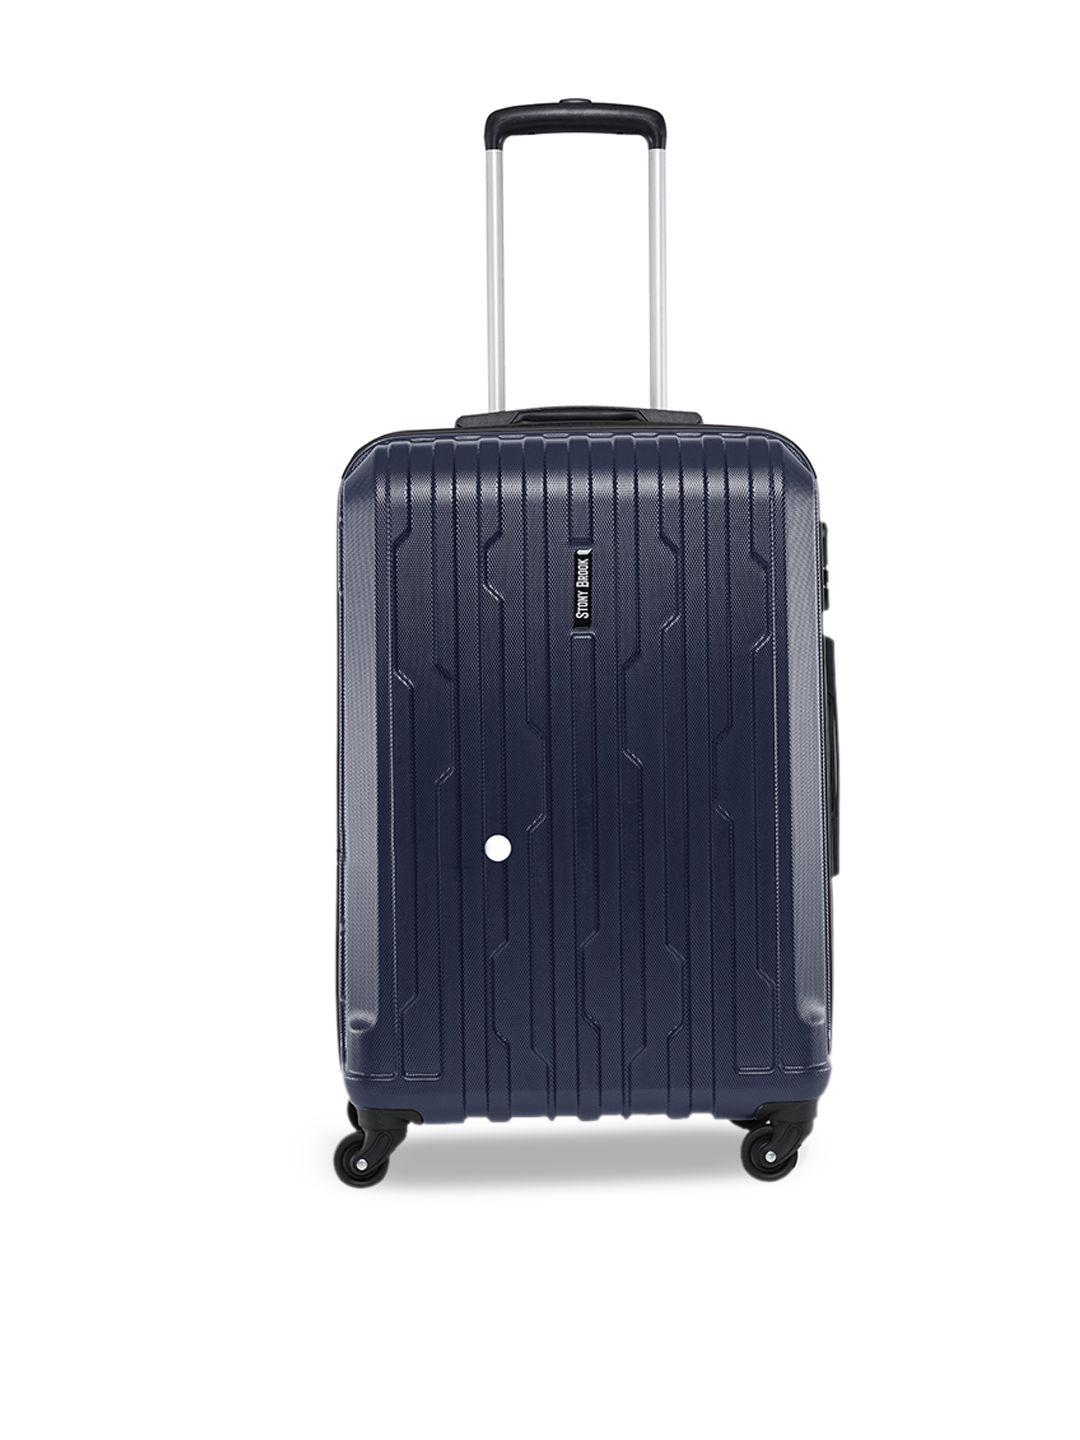 stony brook by nasher miles textured hard-sided large trolley suitcase